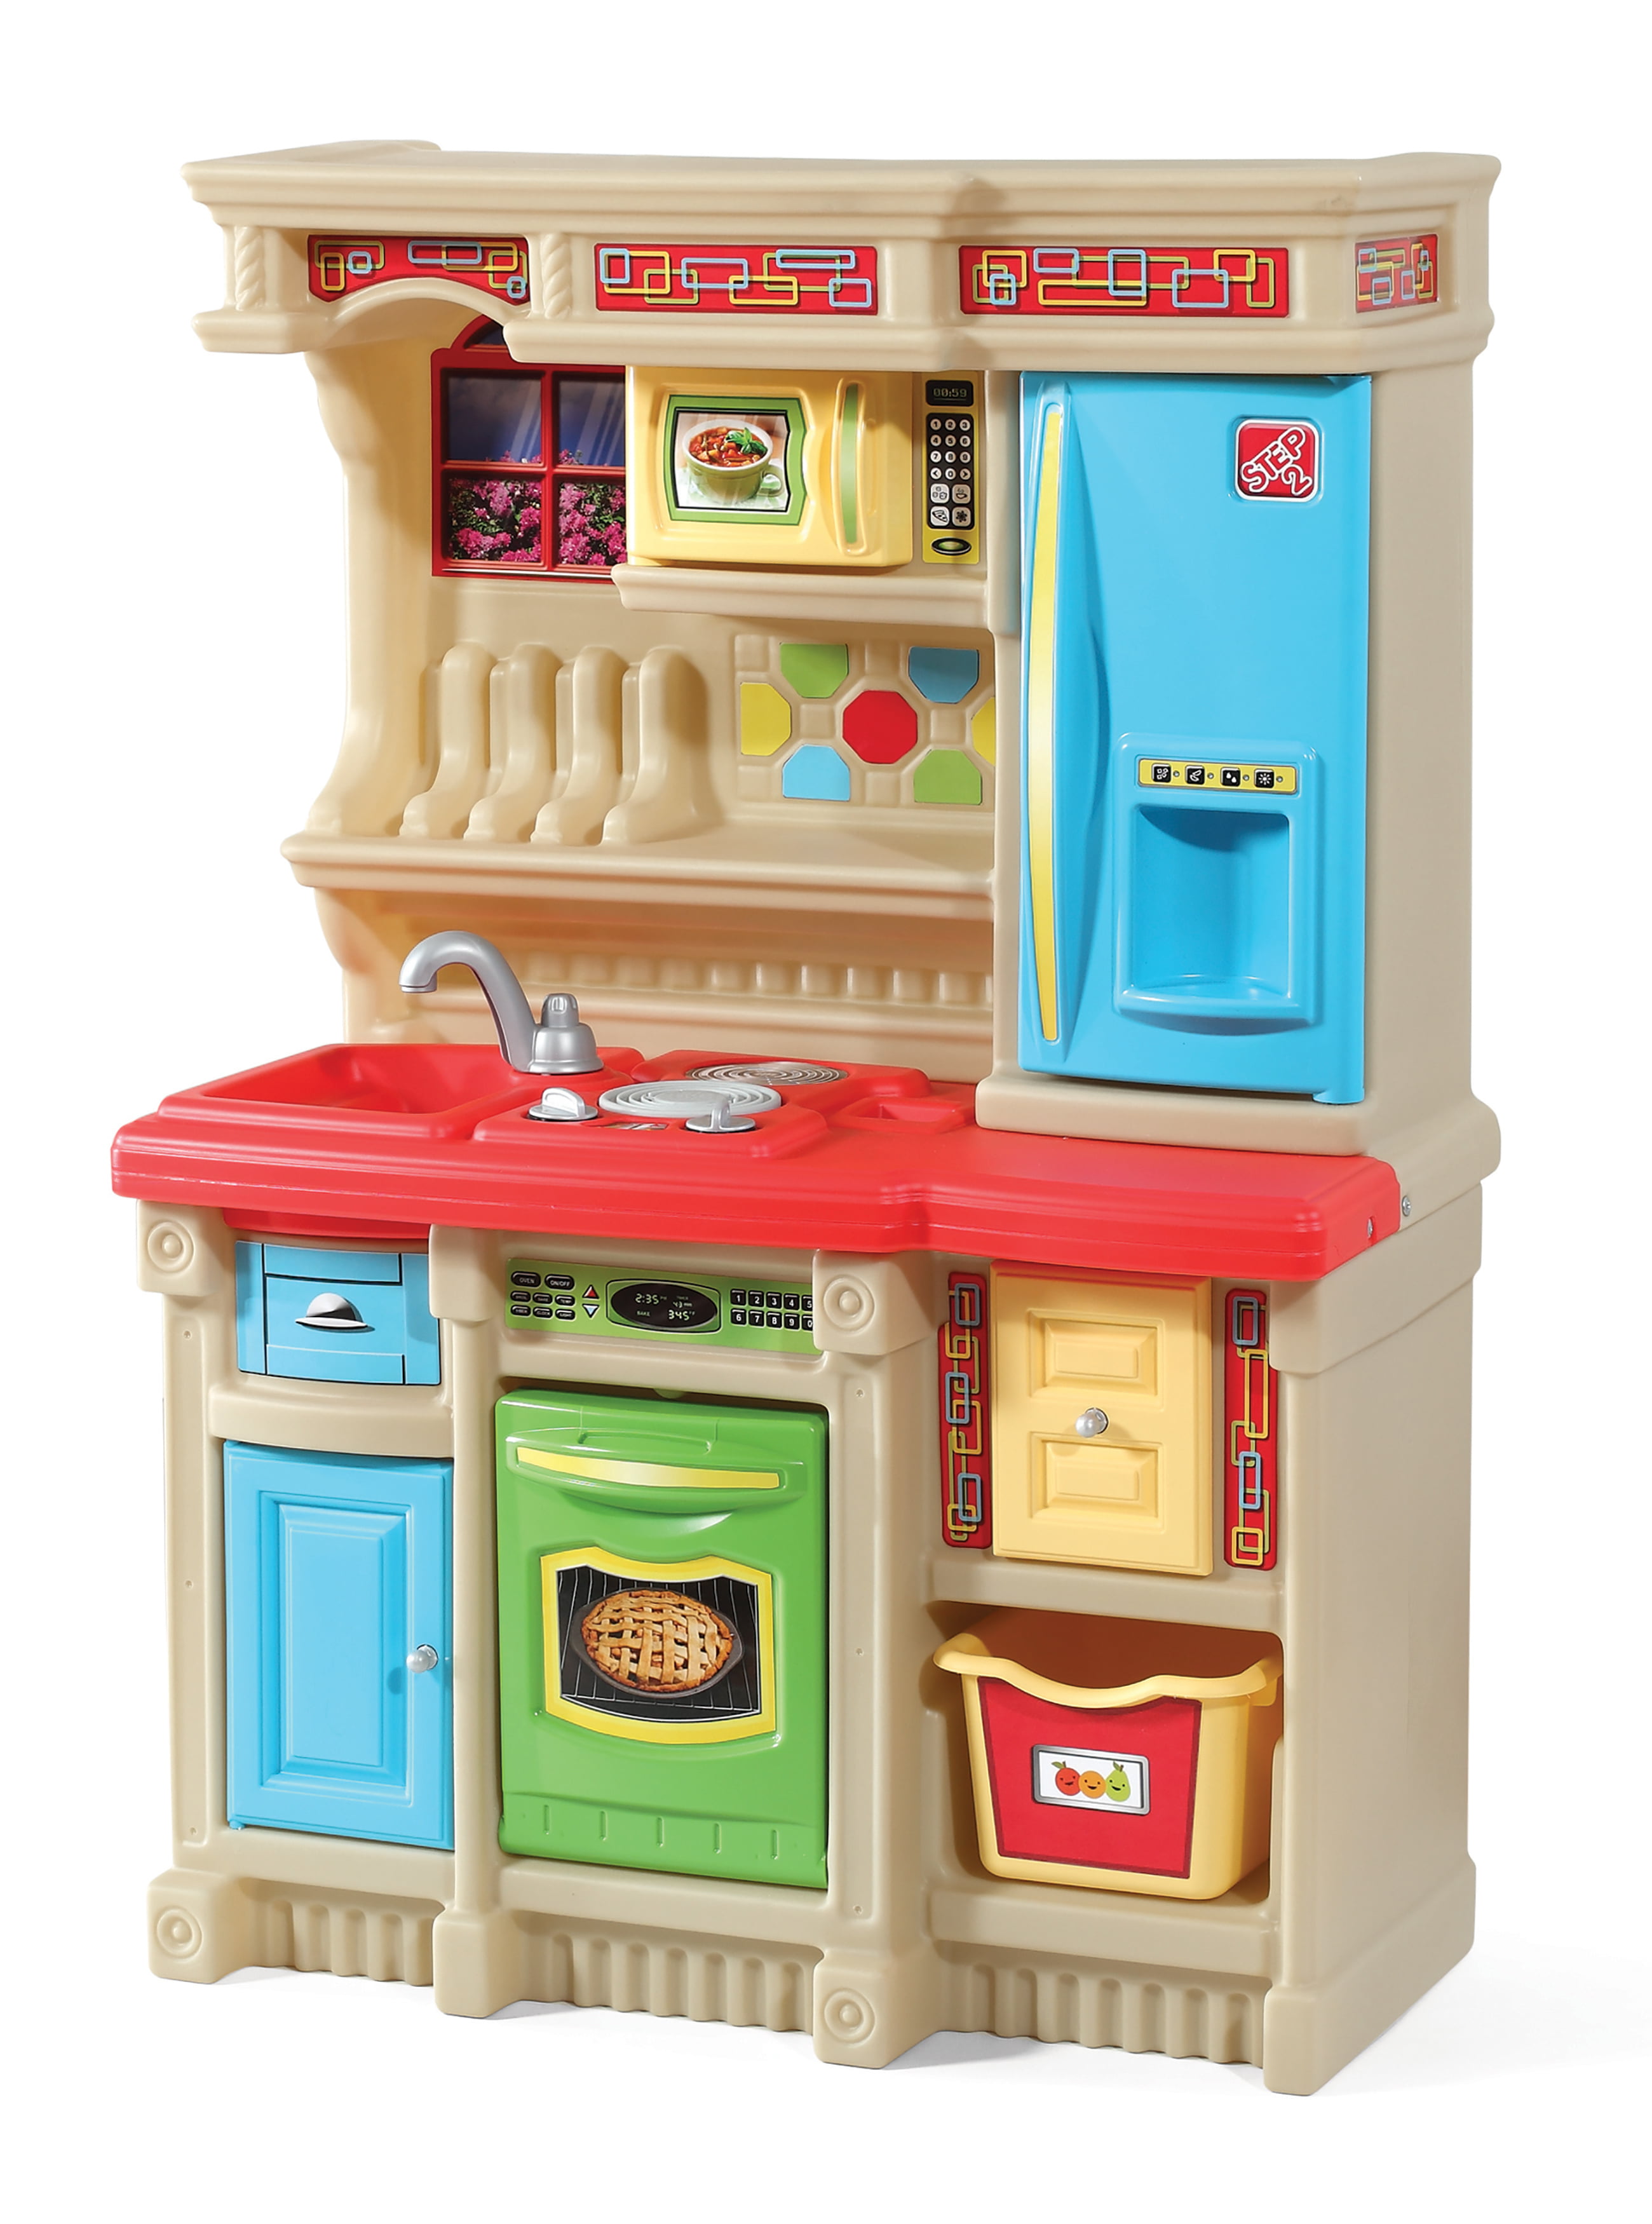 Step2 Lifestyle Custom Play Kitchen with 20 Piece Accessory Play Set - Brights - Walmart.com